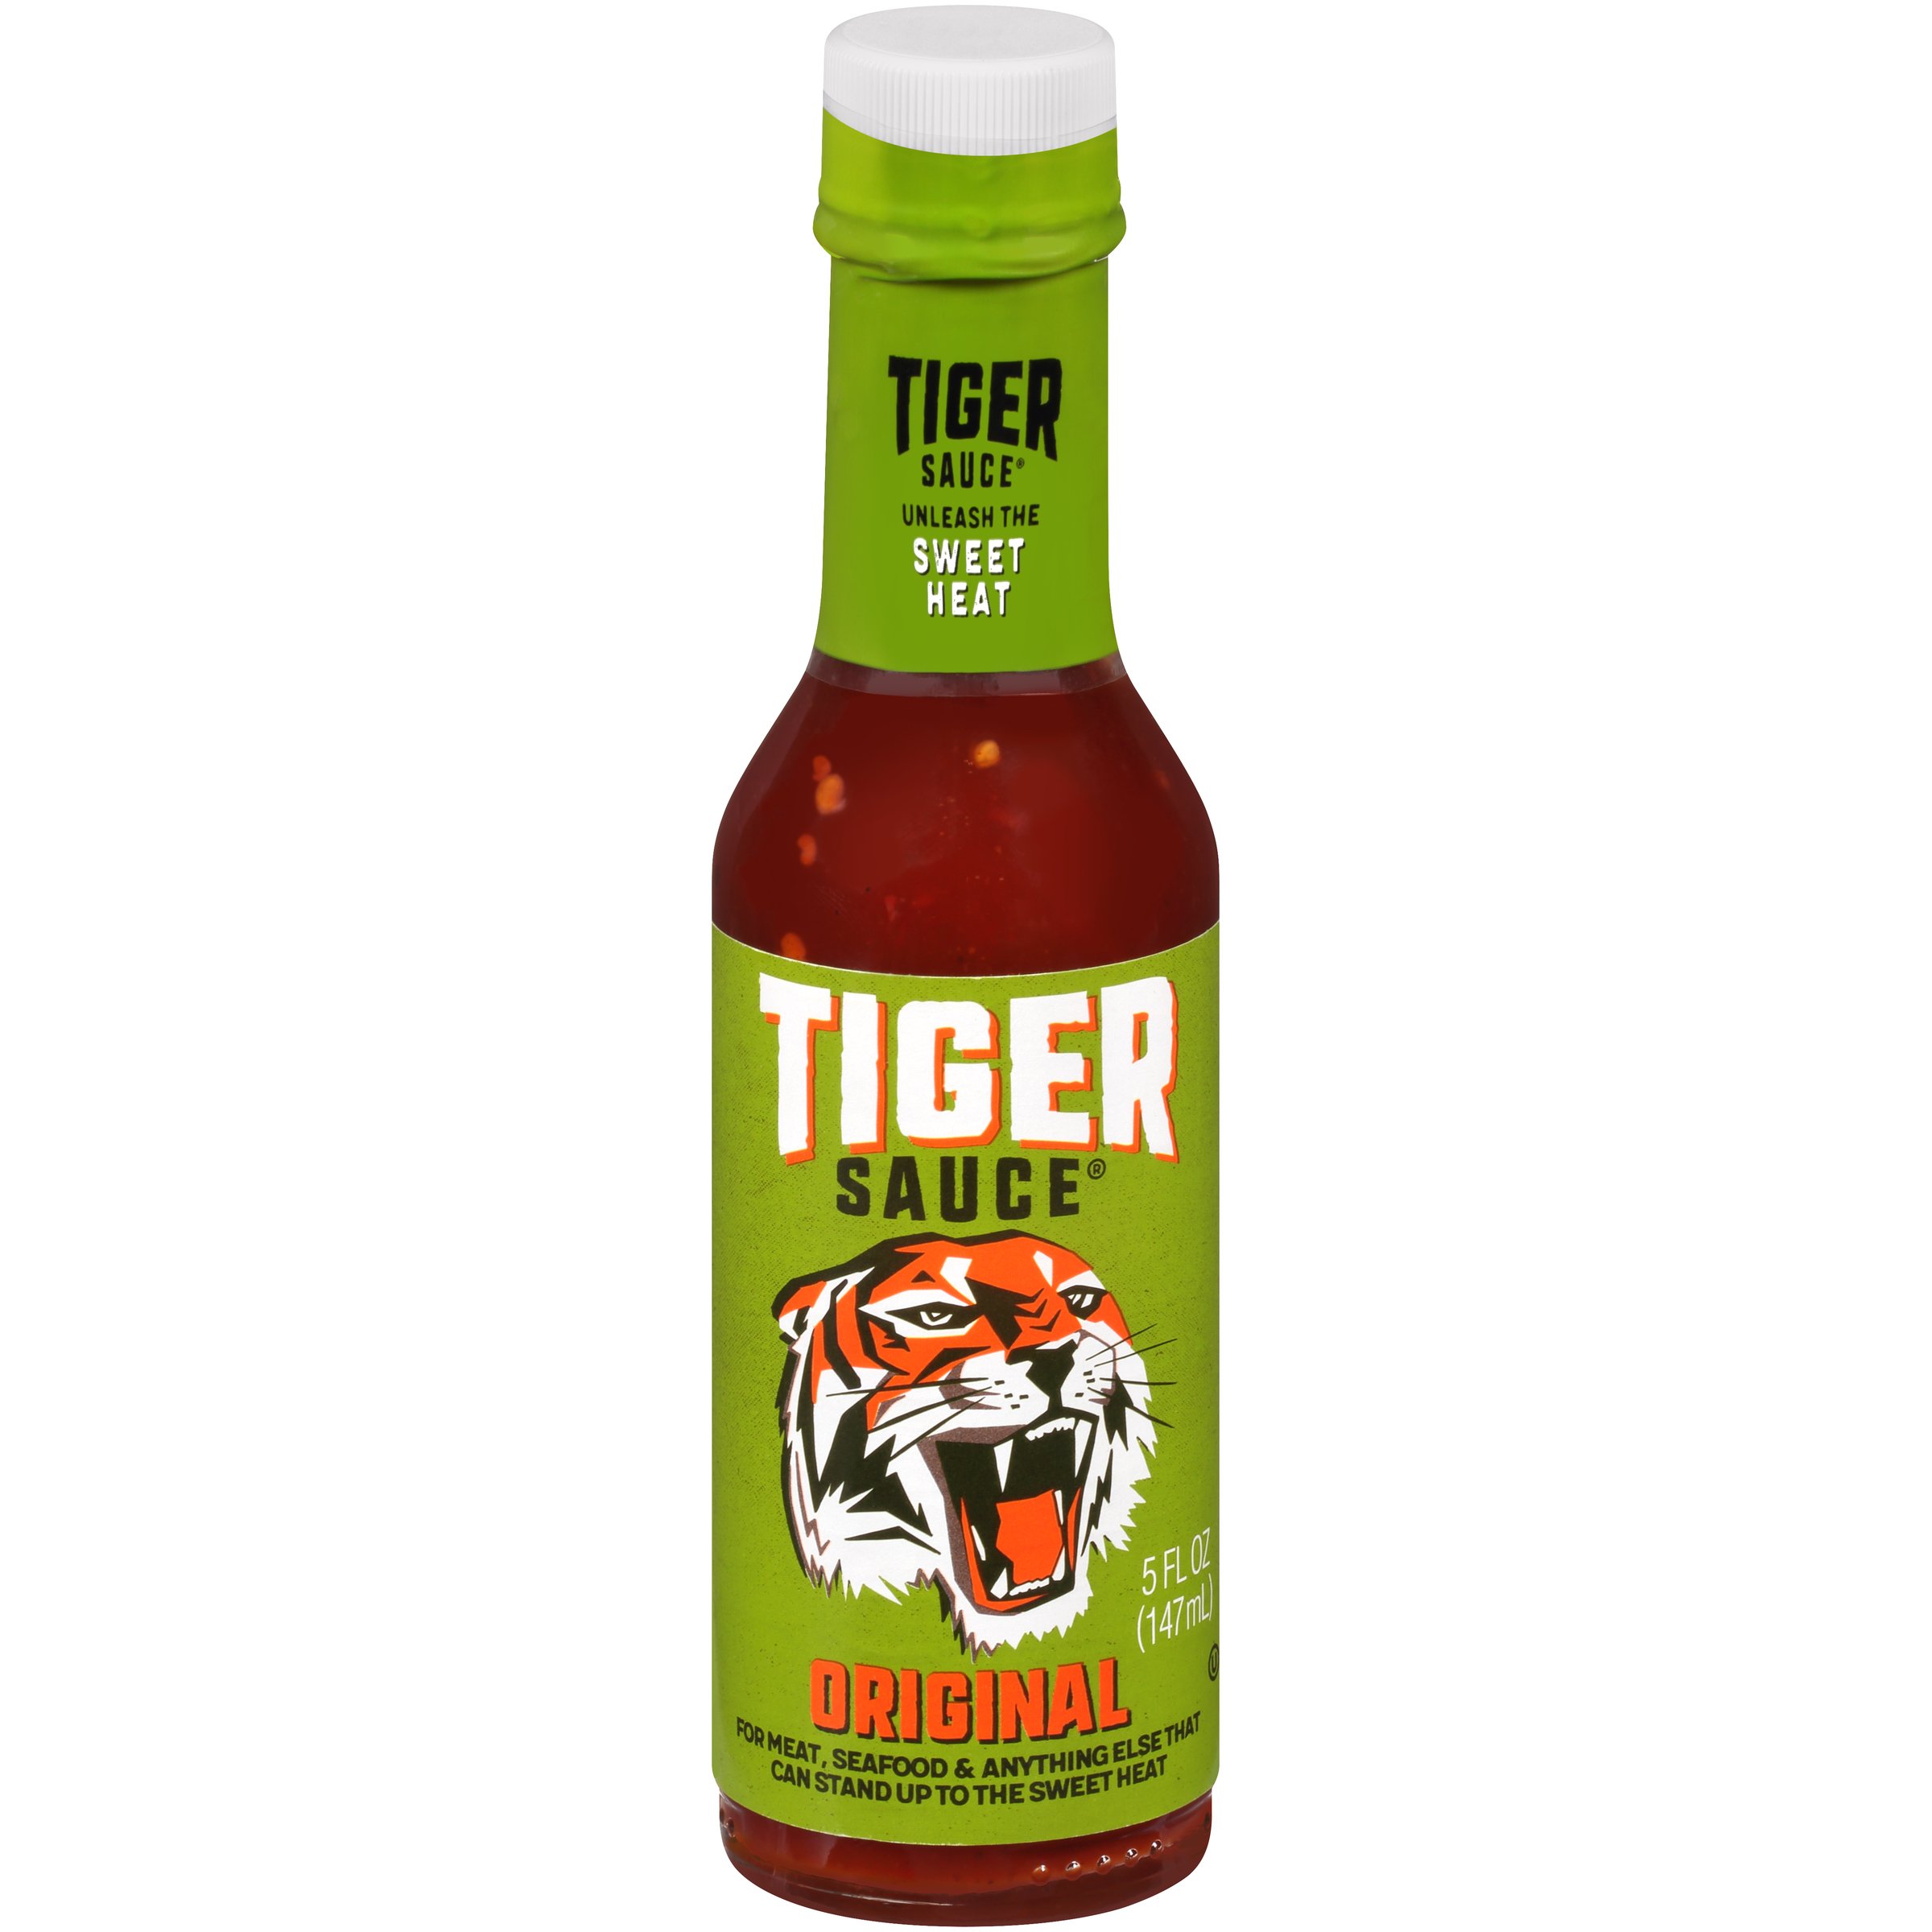 Try Me The Original Tiger Sauce - Shop Specialty Sauces at H-E-B